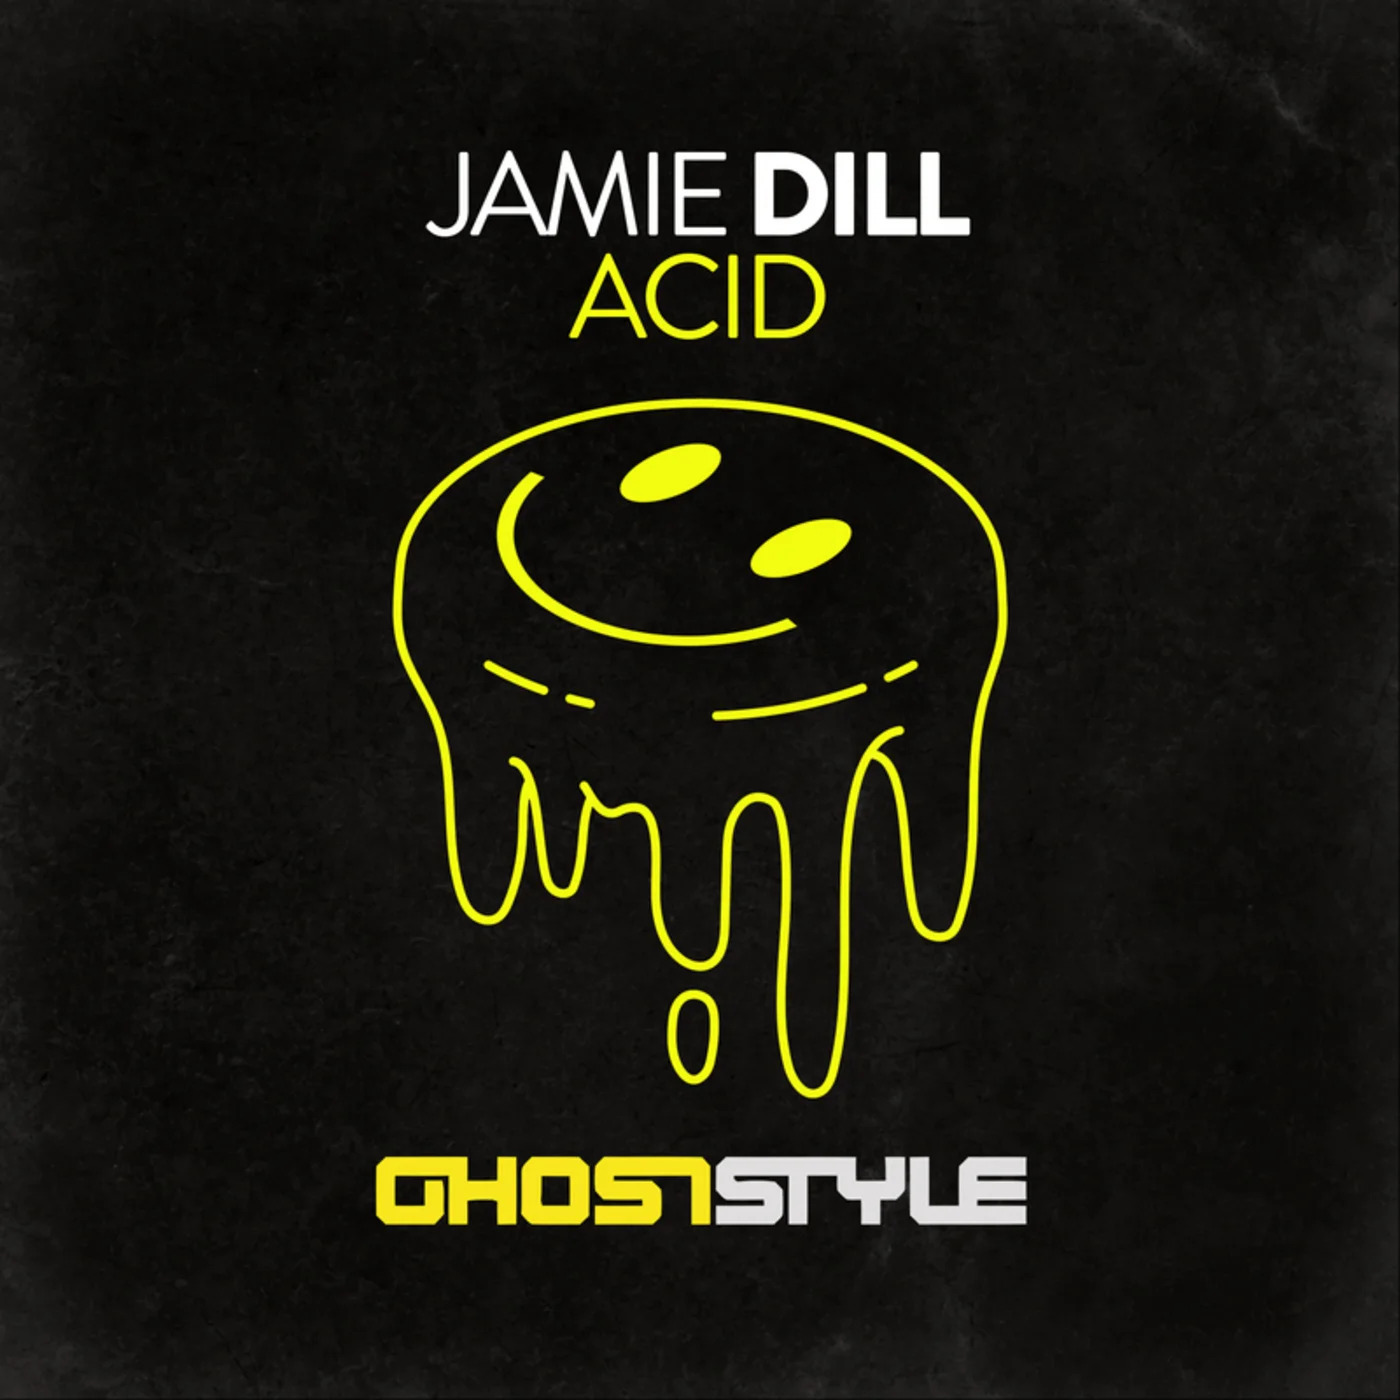 Jamie Dill presents “Acid and “Radical” on Ghoststyle Records